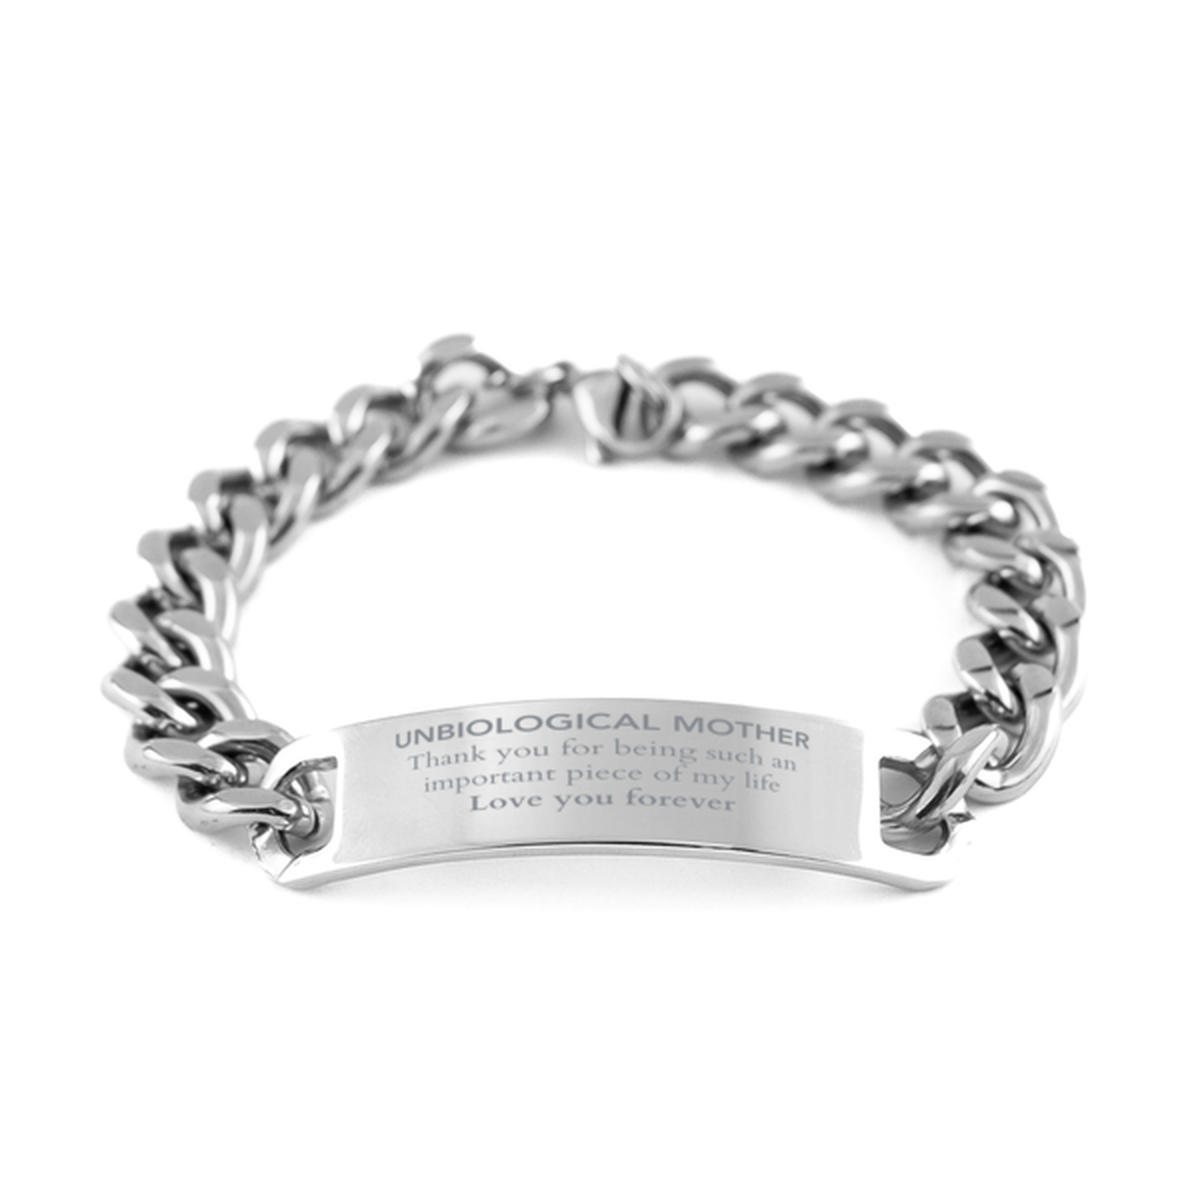 Appropriate Unbiological Mother Cuban Chain Stainless Steel Bracelet Epic Birthday Gifts for Unbiological Mother Thank you for being such an important piece of my life Unbiological Mother Christmas Mothers Fathers Day